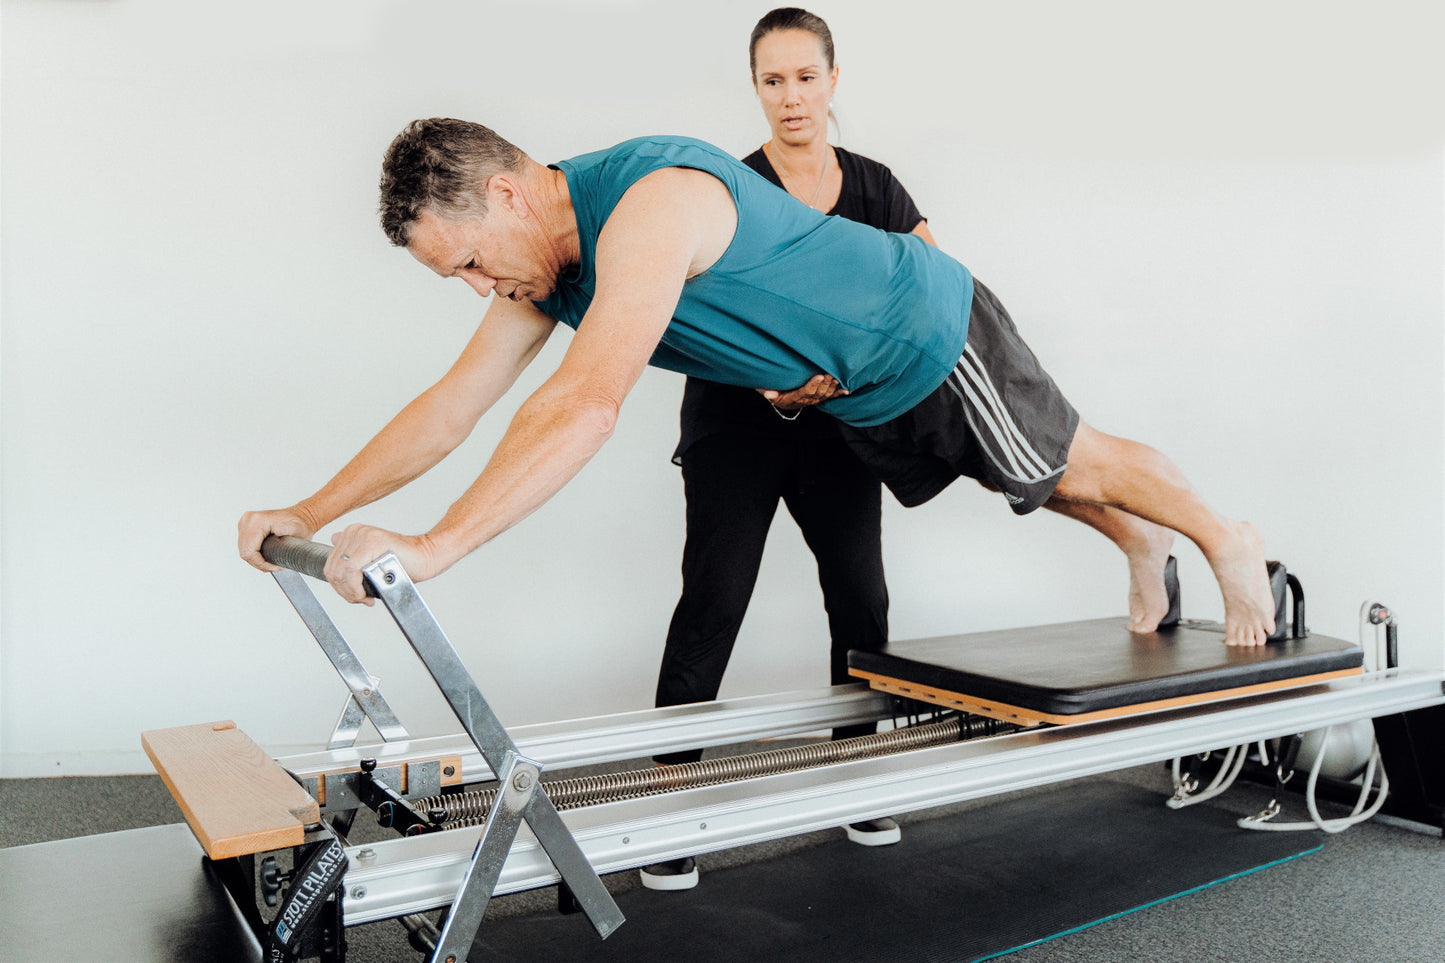 How many Suna Pilates workouts per week is perfect?